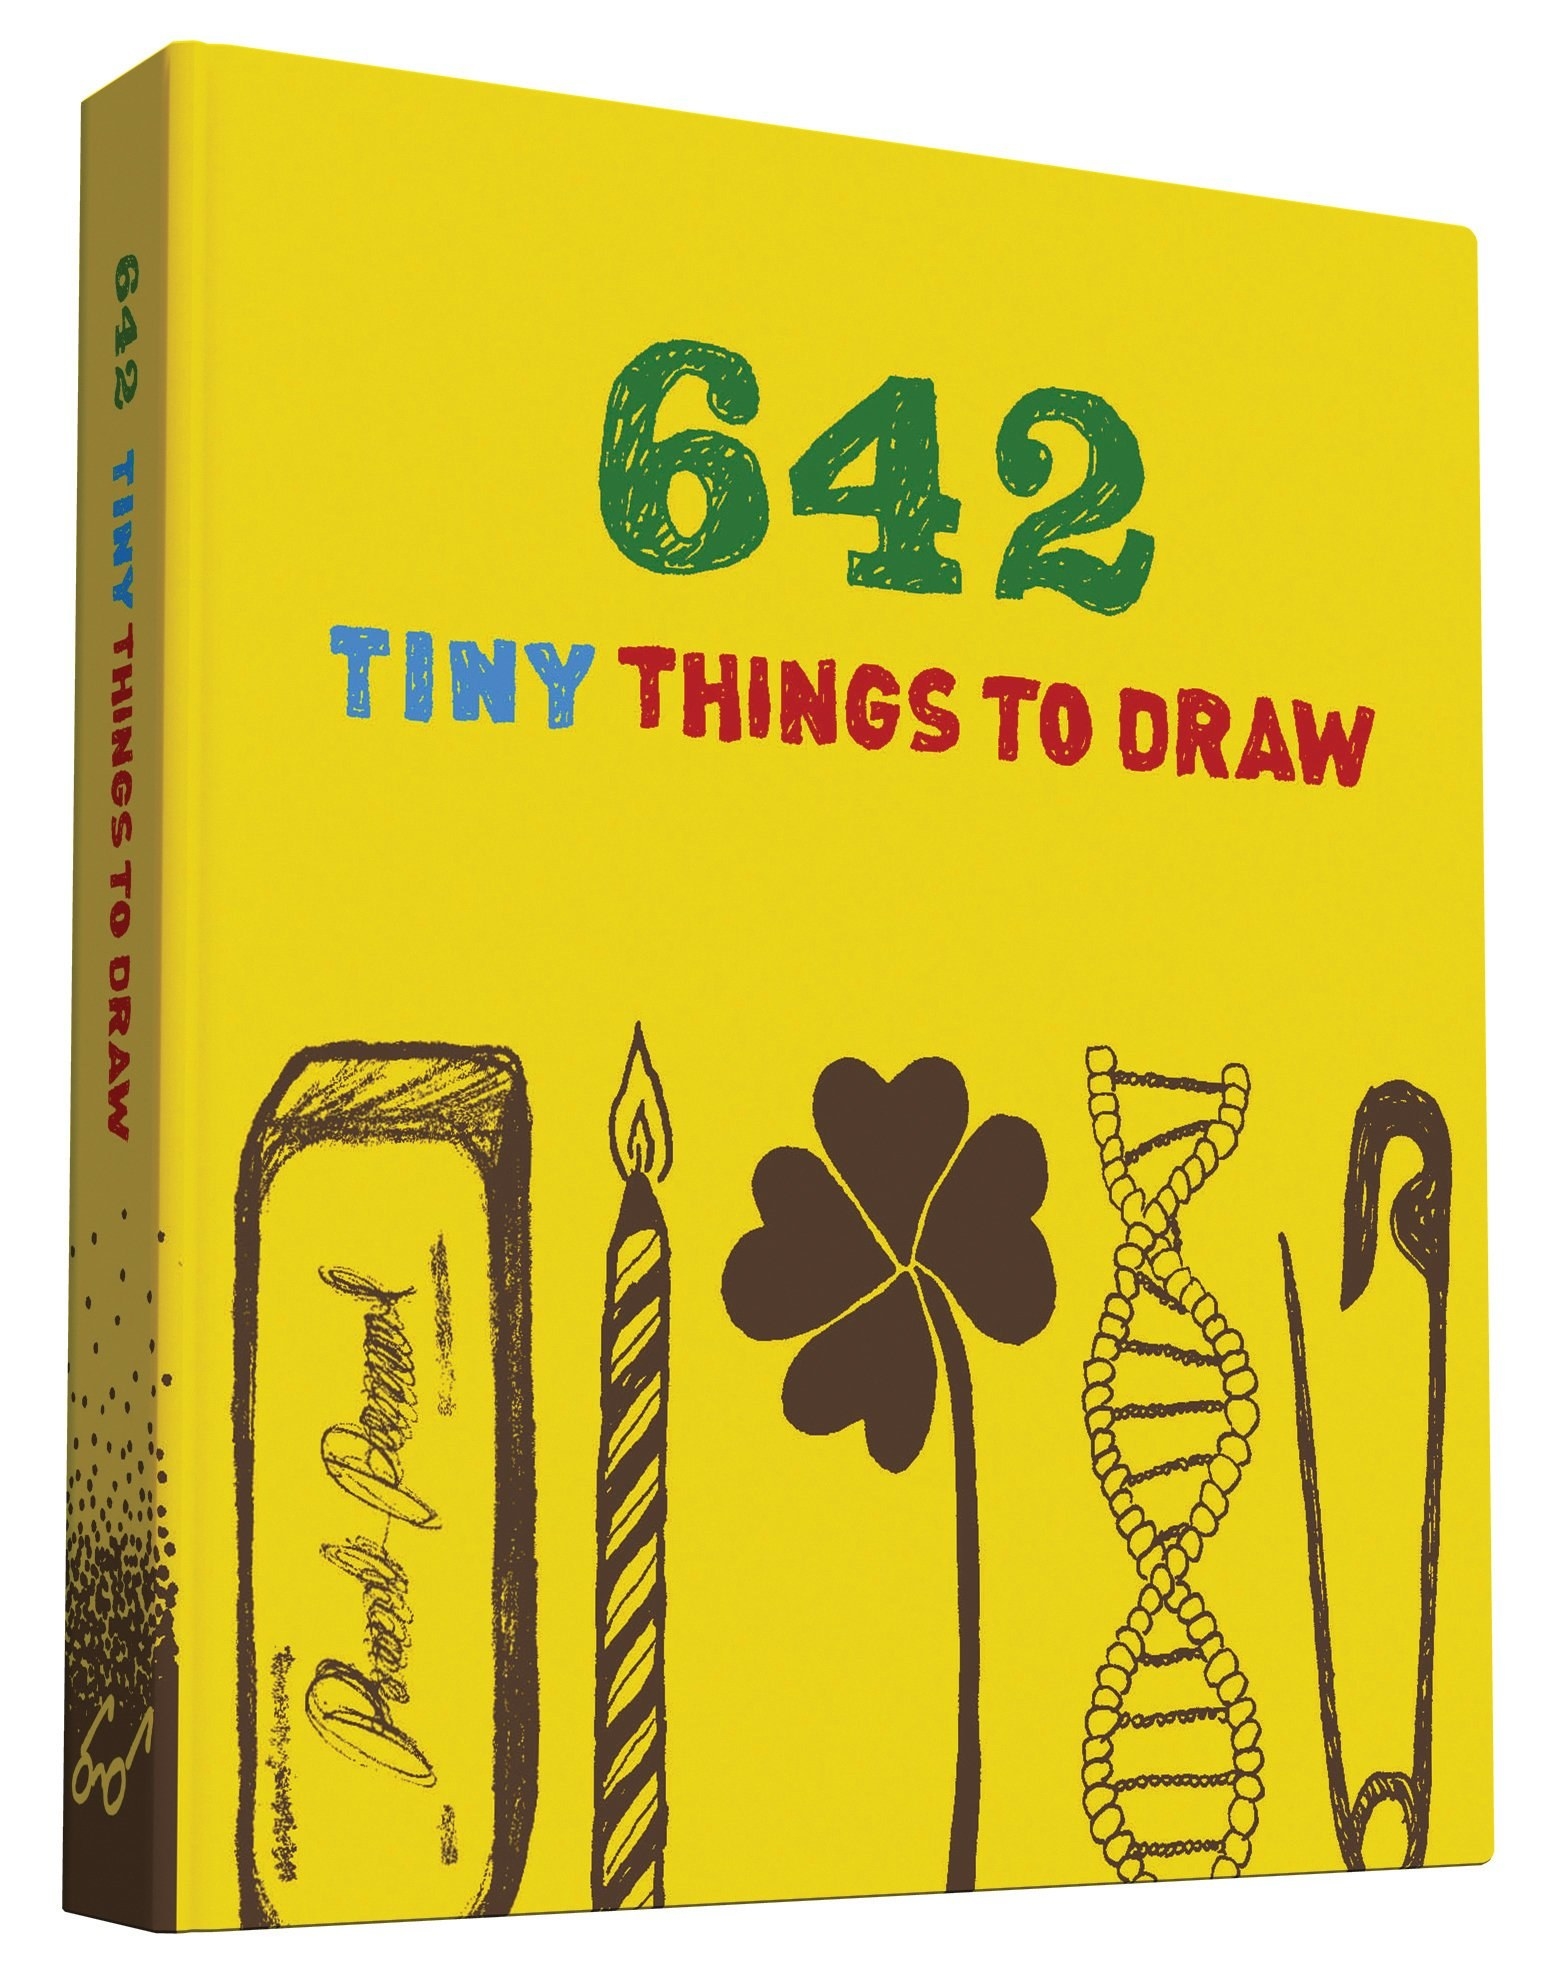 cover of 642 Tiny Things To Draw